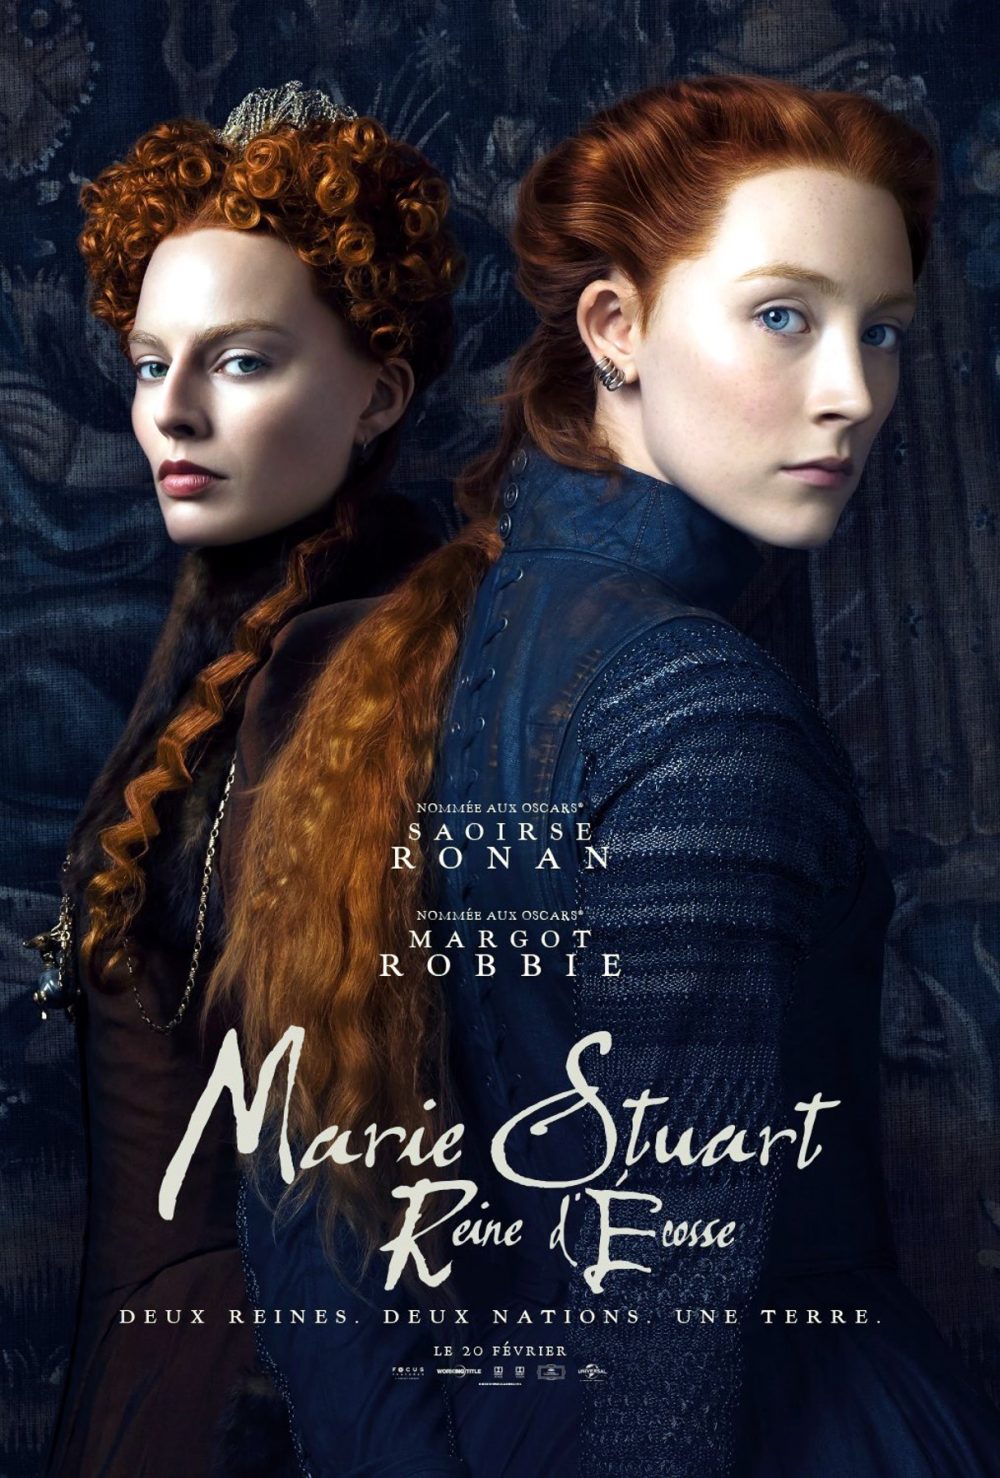 Nữ hoàng Scotland - Mary Queen of Scots (2018)